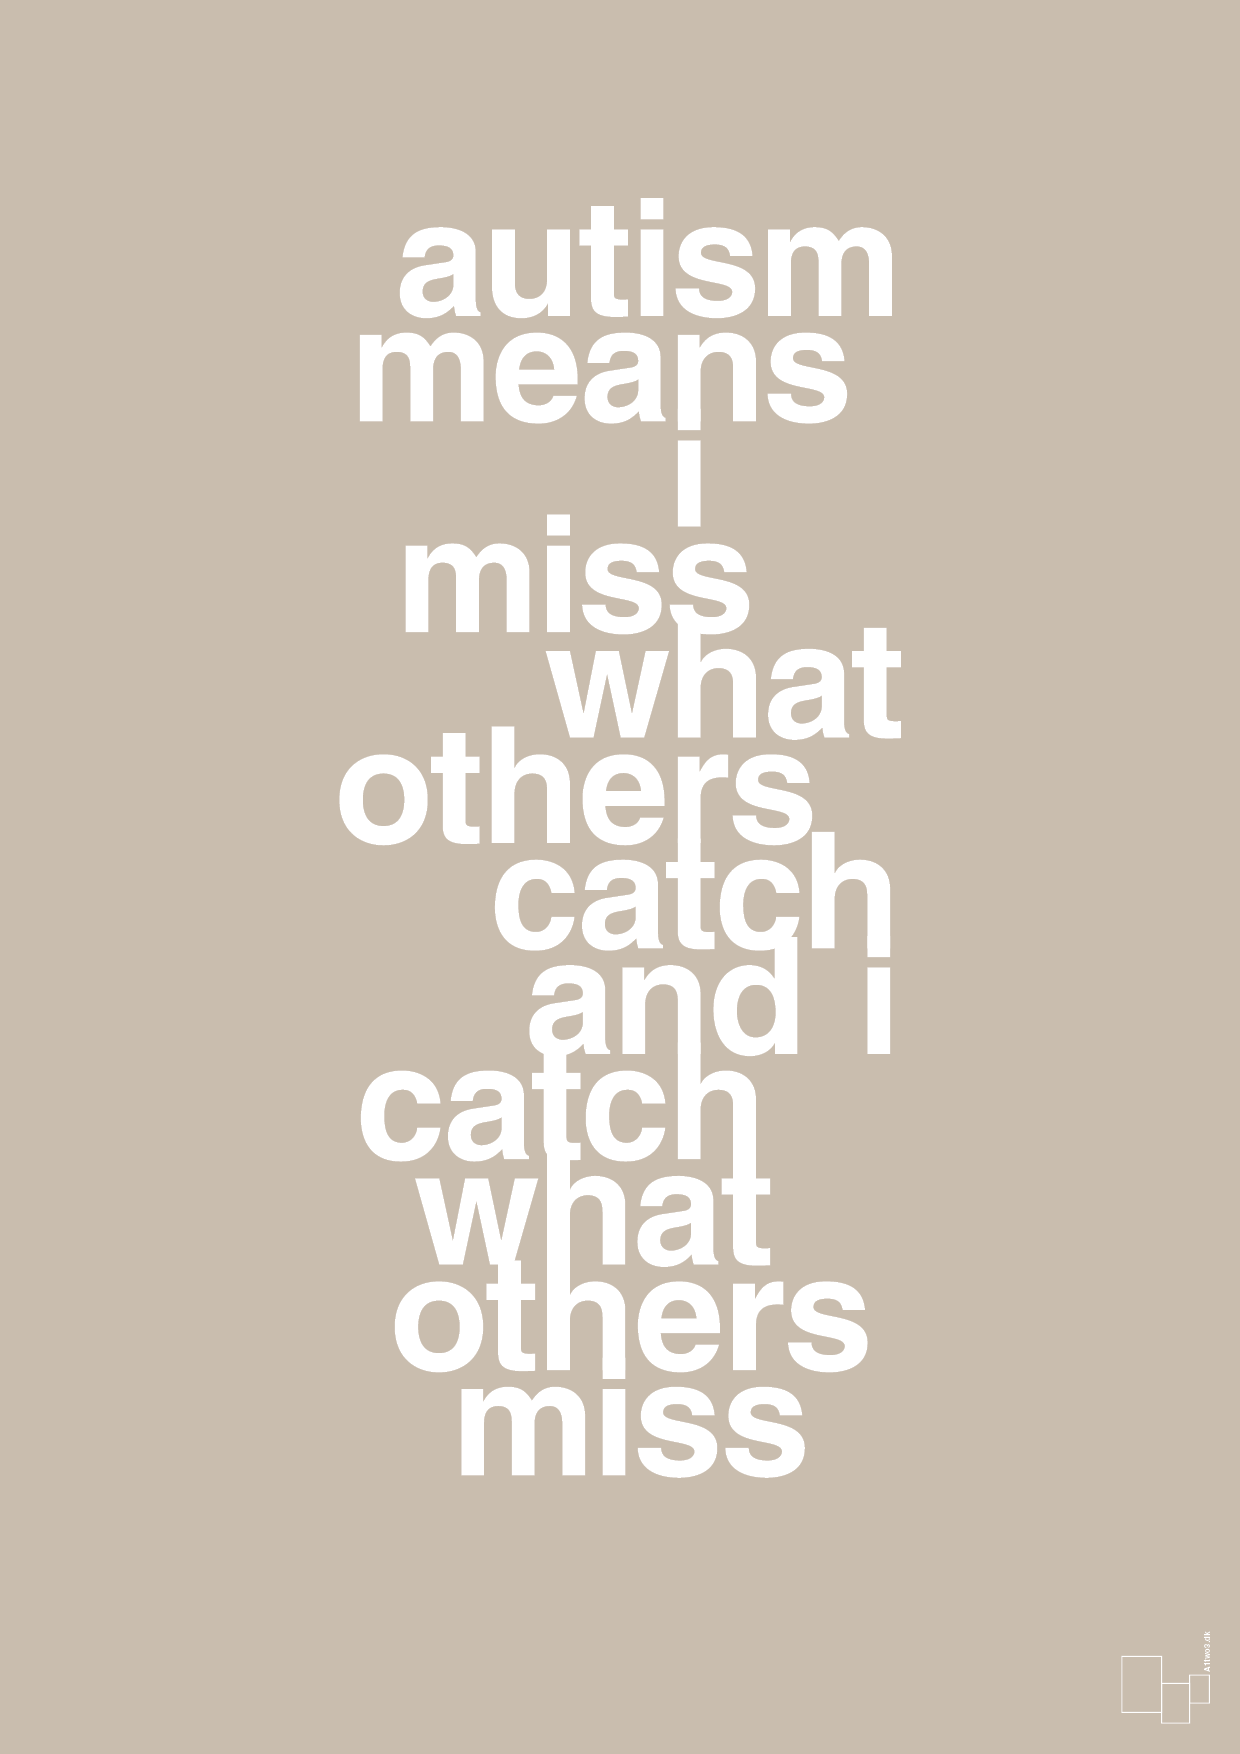 autism means i miss what others catch and i catch what others miss - Plakat med Samfund i Creamy Mushroom